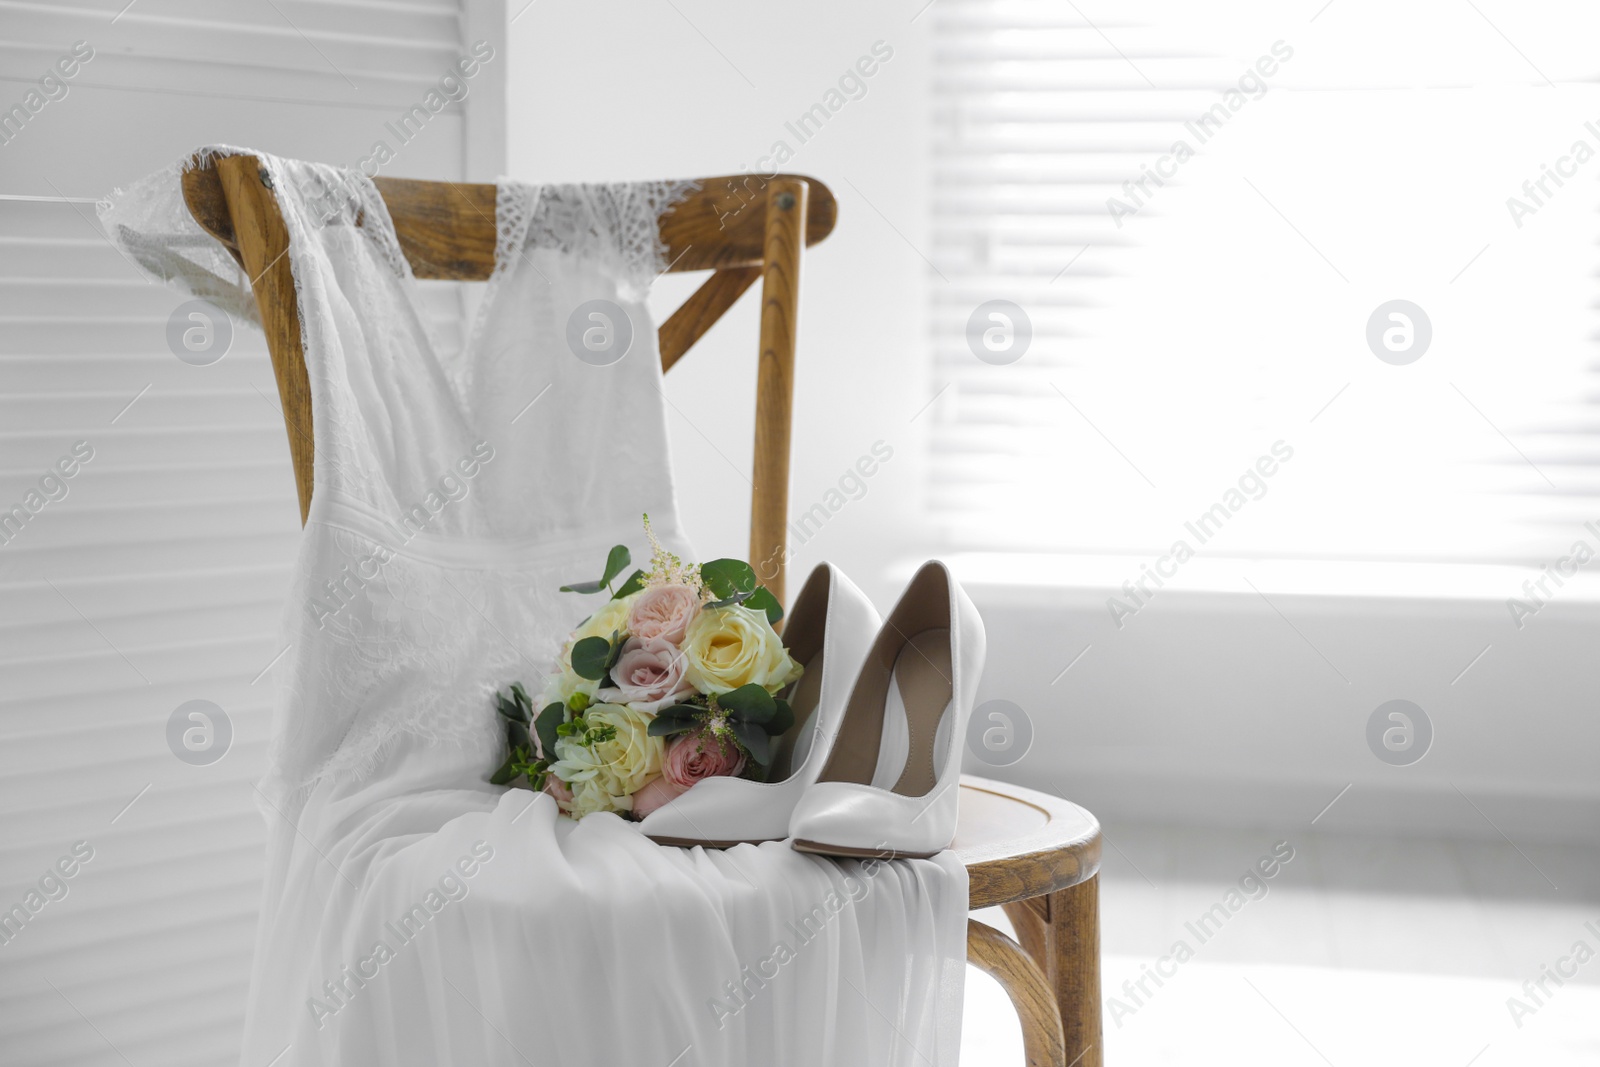 Photo of White high heel shoes, flowers and wedding dress on wooden chair indoors. Space for text